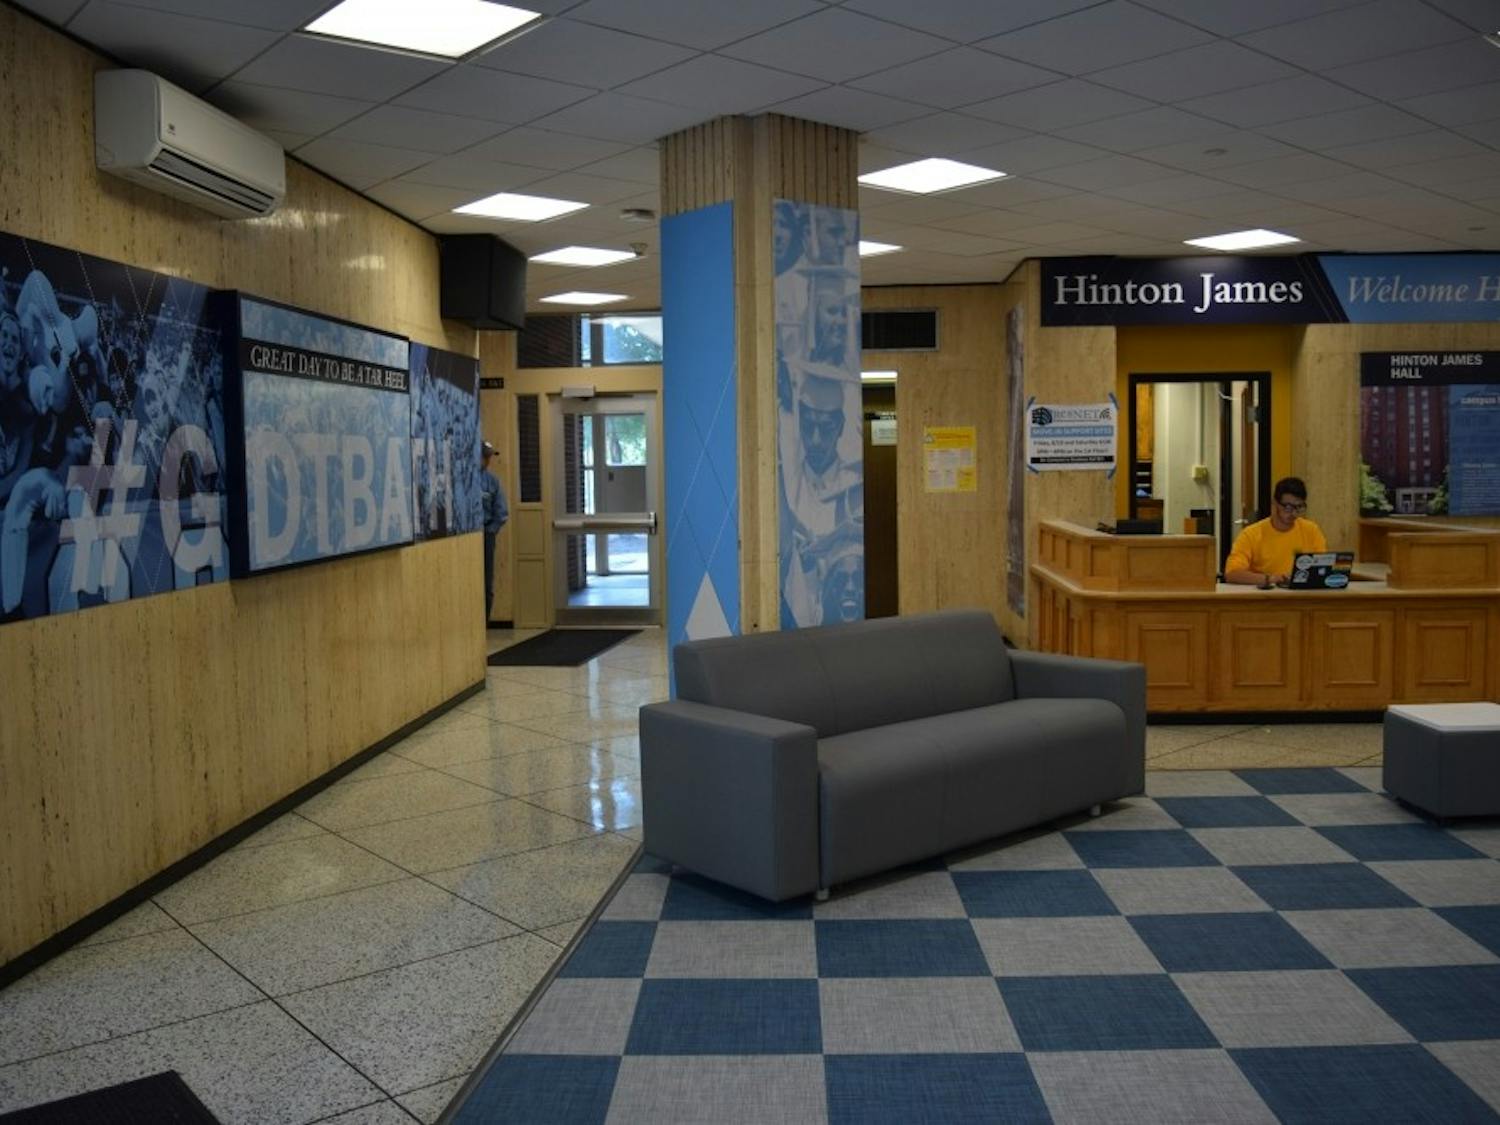 A resident of Hinton James Residence Hall was reported dead. 